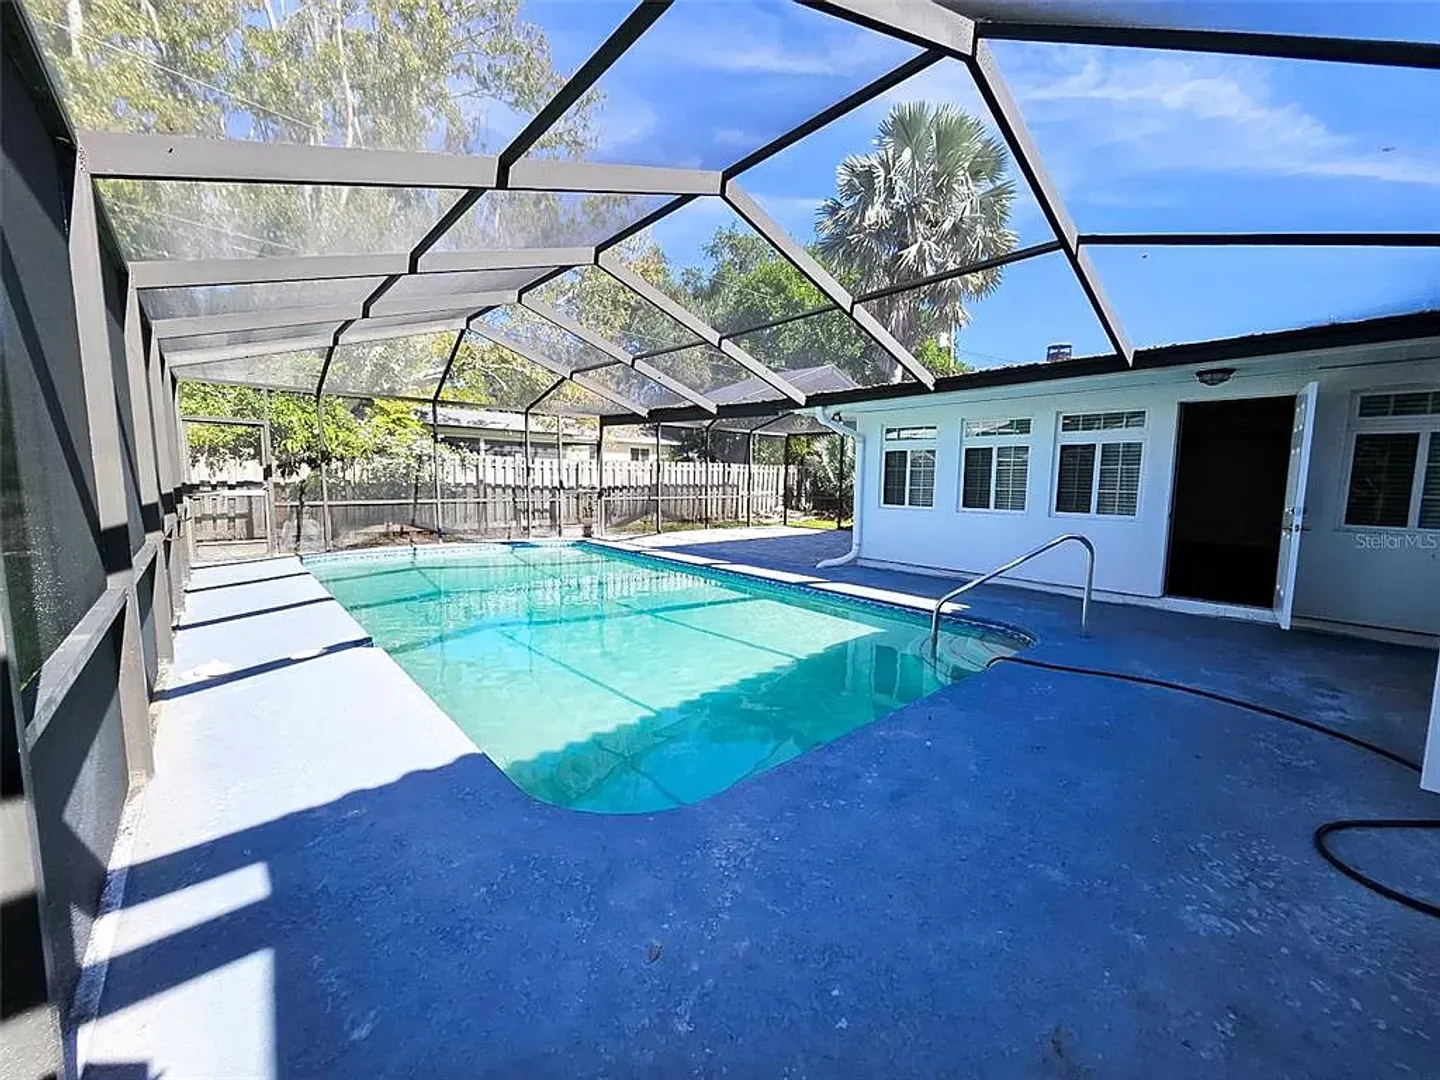 Come and see this beautiful, updated pool home in Clearwater Florida